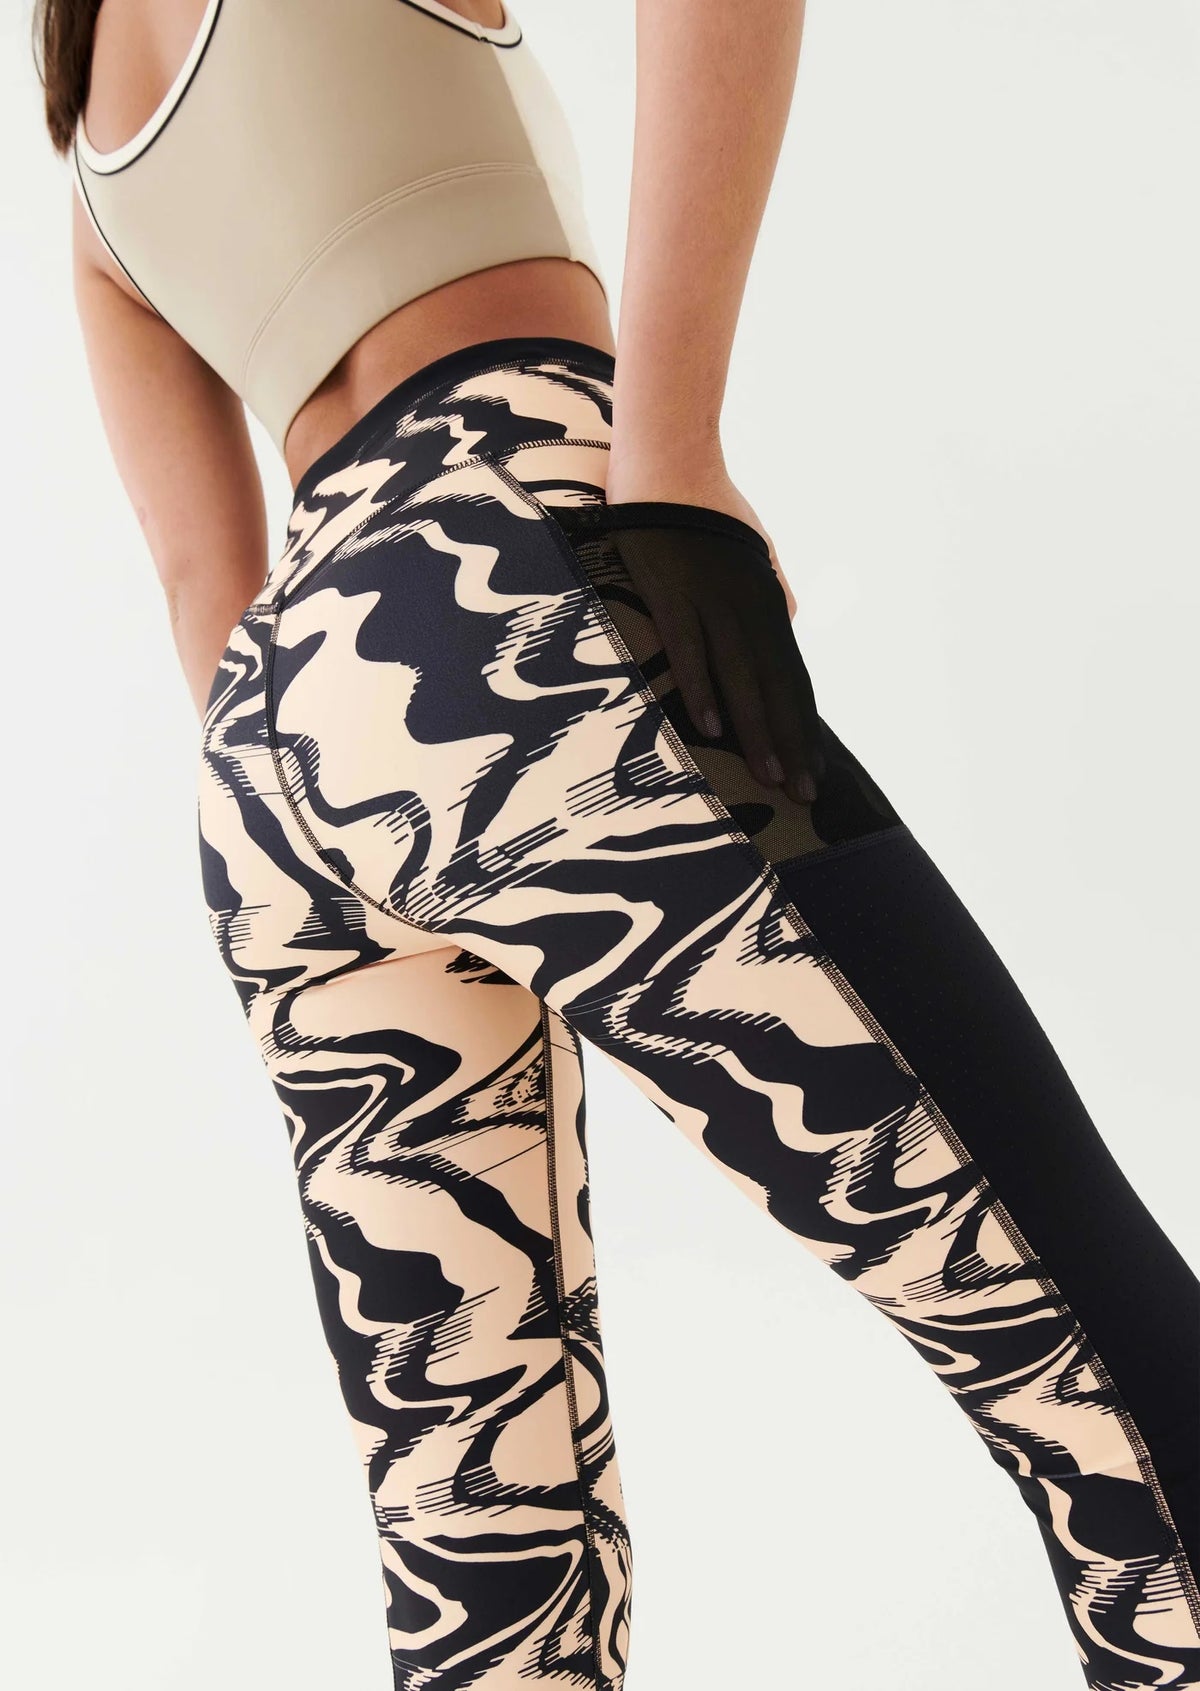 PE Nation Womens New Wave Legging in Print